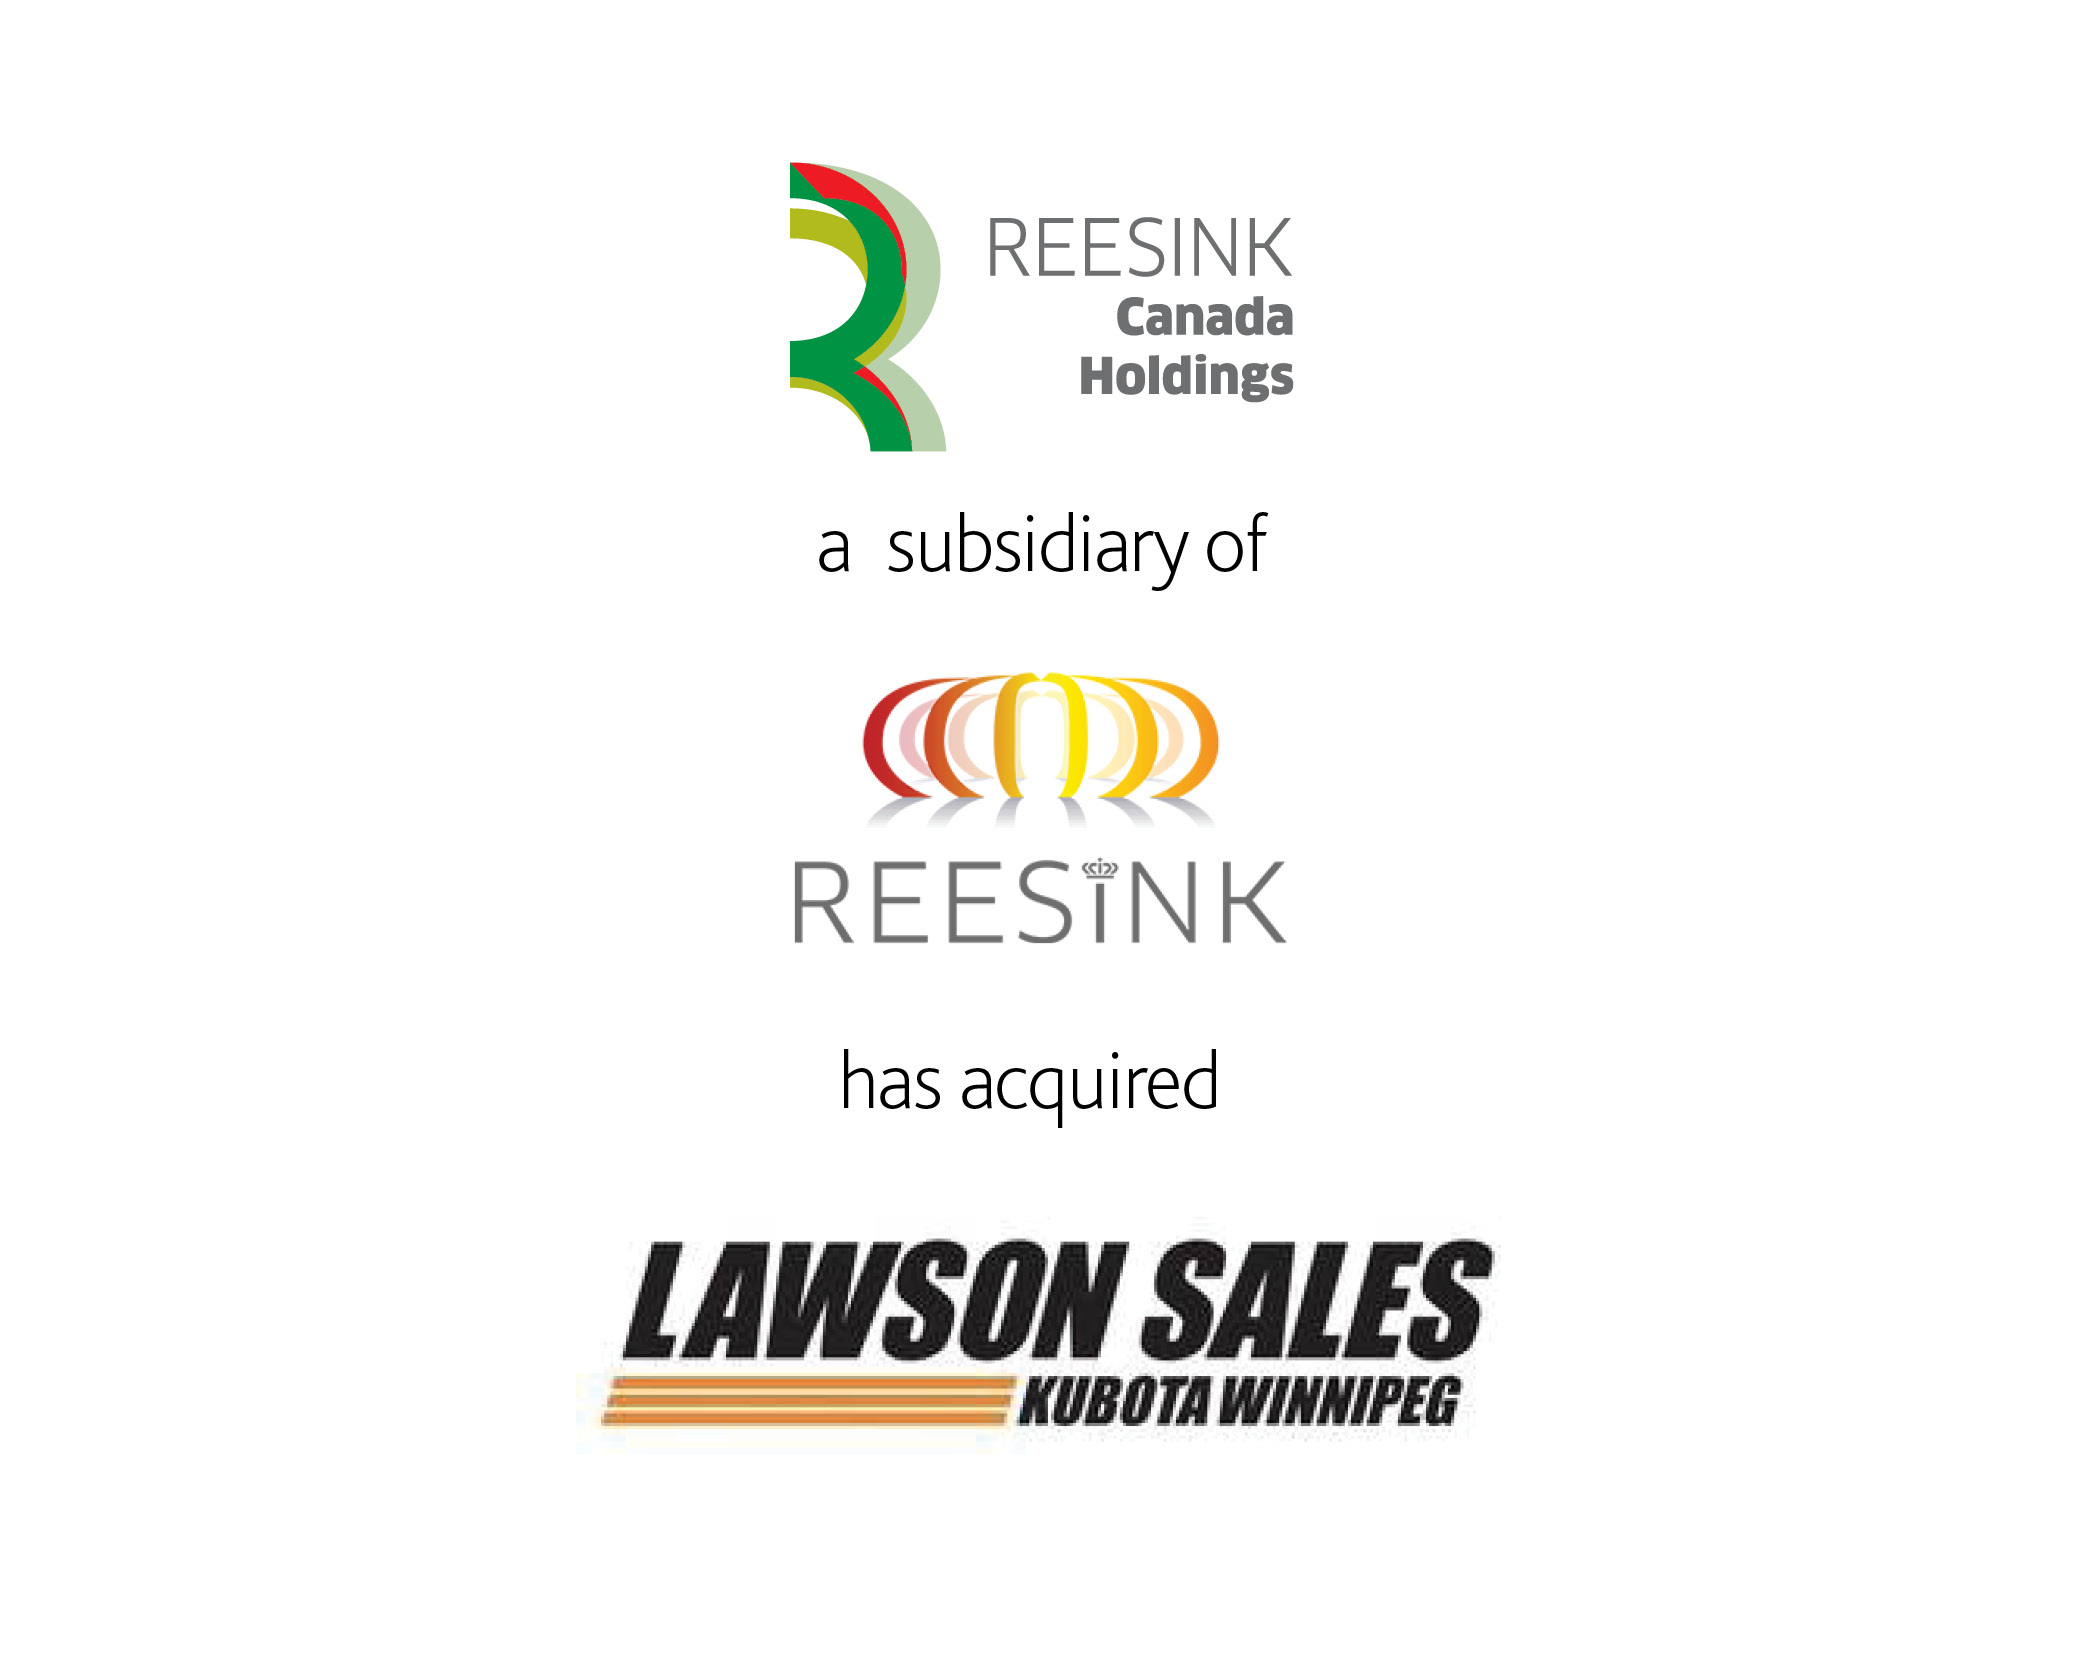 The Reesink Canada Holdings Inc. logo and the Lawson Sales logo.